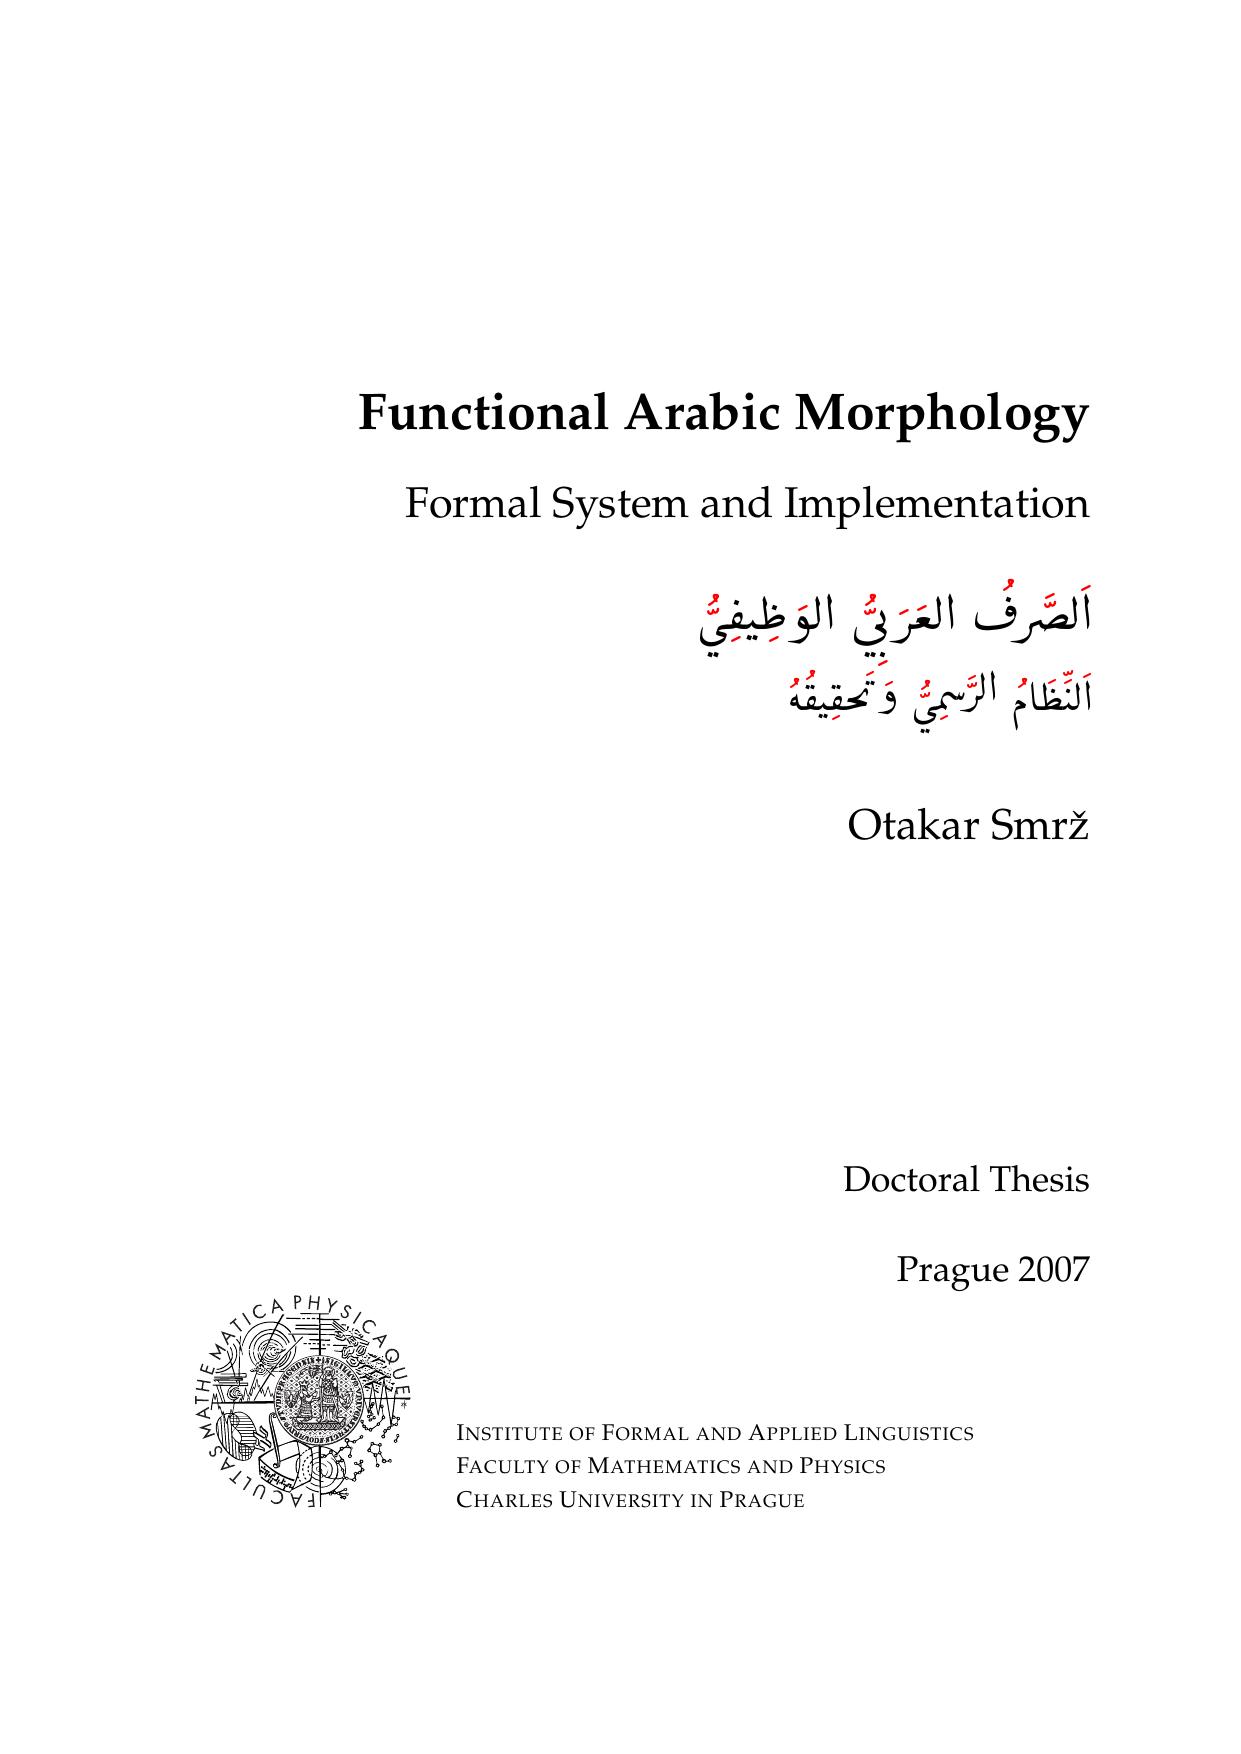 Functional Arabic Morphology  Institute  of  Formal  and  Applied  2007